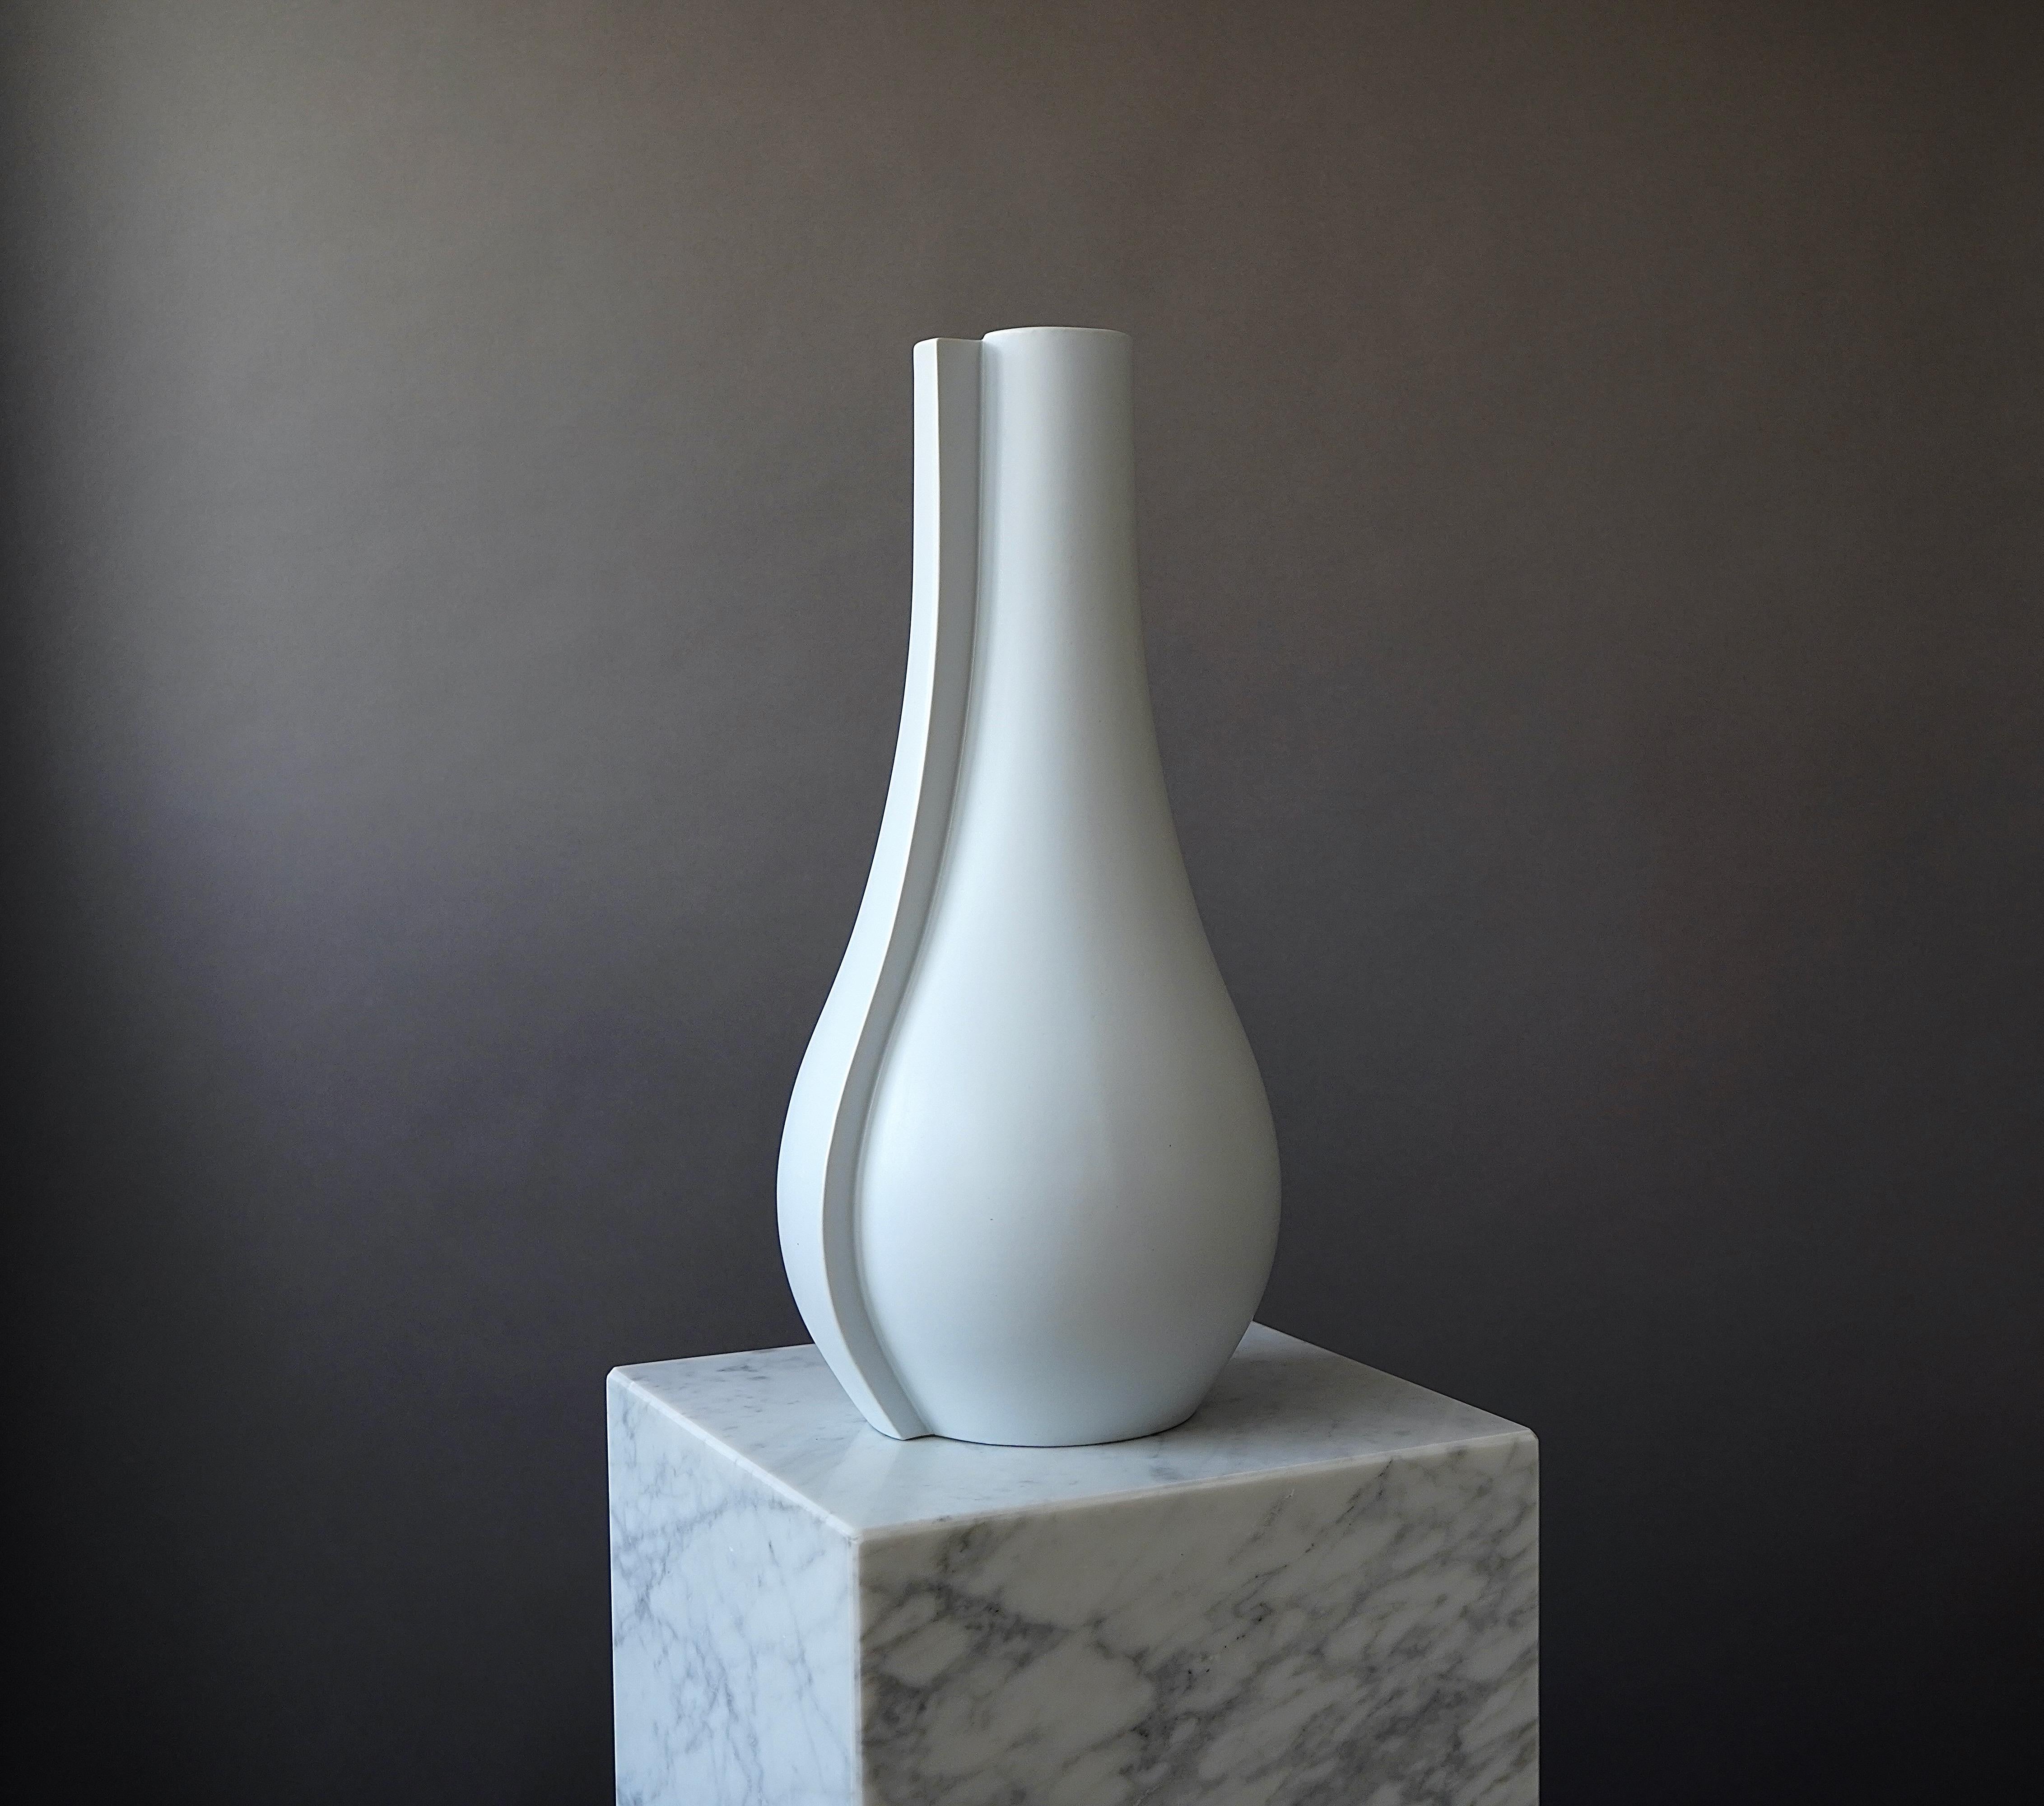 A beautiful 'Swedish Modern' stoneware vase with 'Carrara' glaze.
Made by Wilhelm Kåge at Gustavsberg in Sweden, 1940s. 

Great condition. 

Wilhelm Kåge was a Swedish artist, painter, and ceramicist. Between 1917 and 1949, he worked as artistic